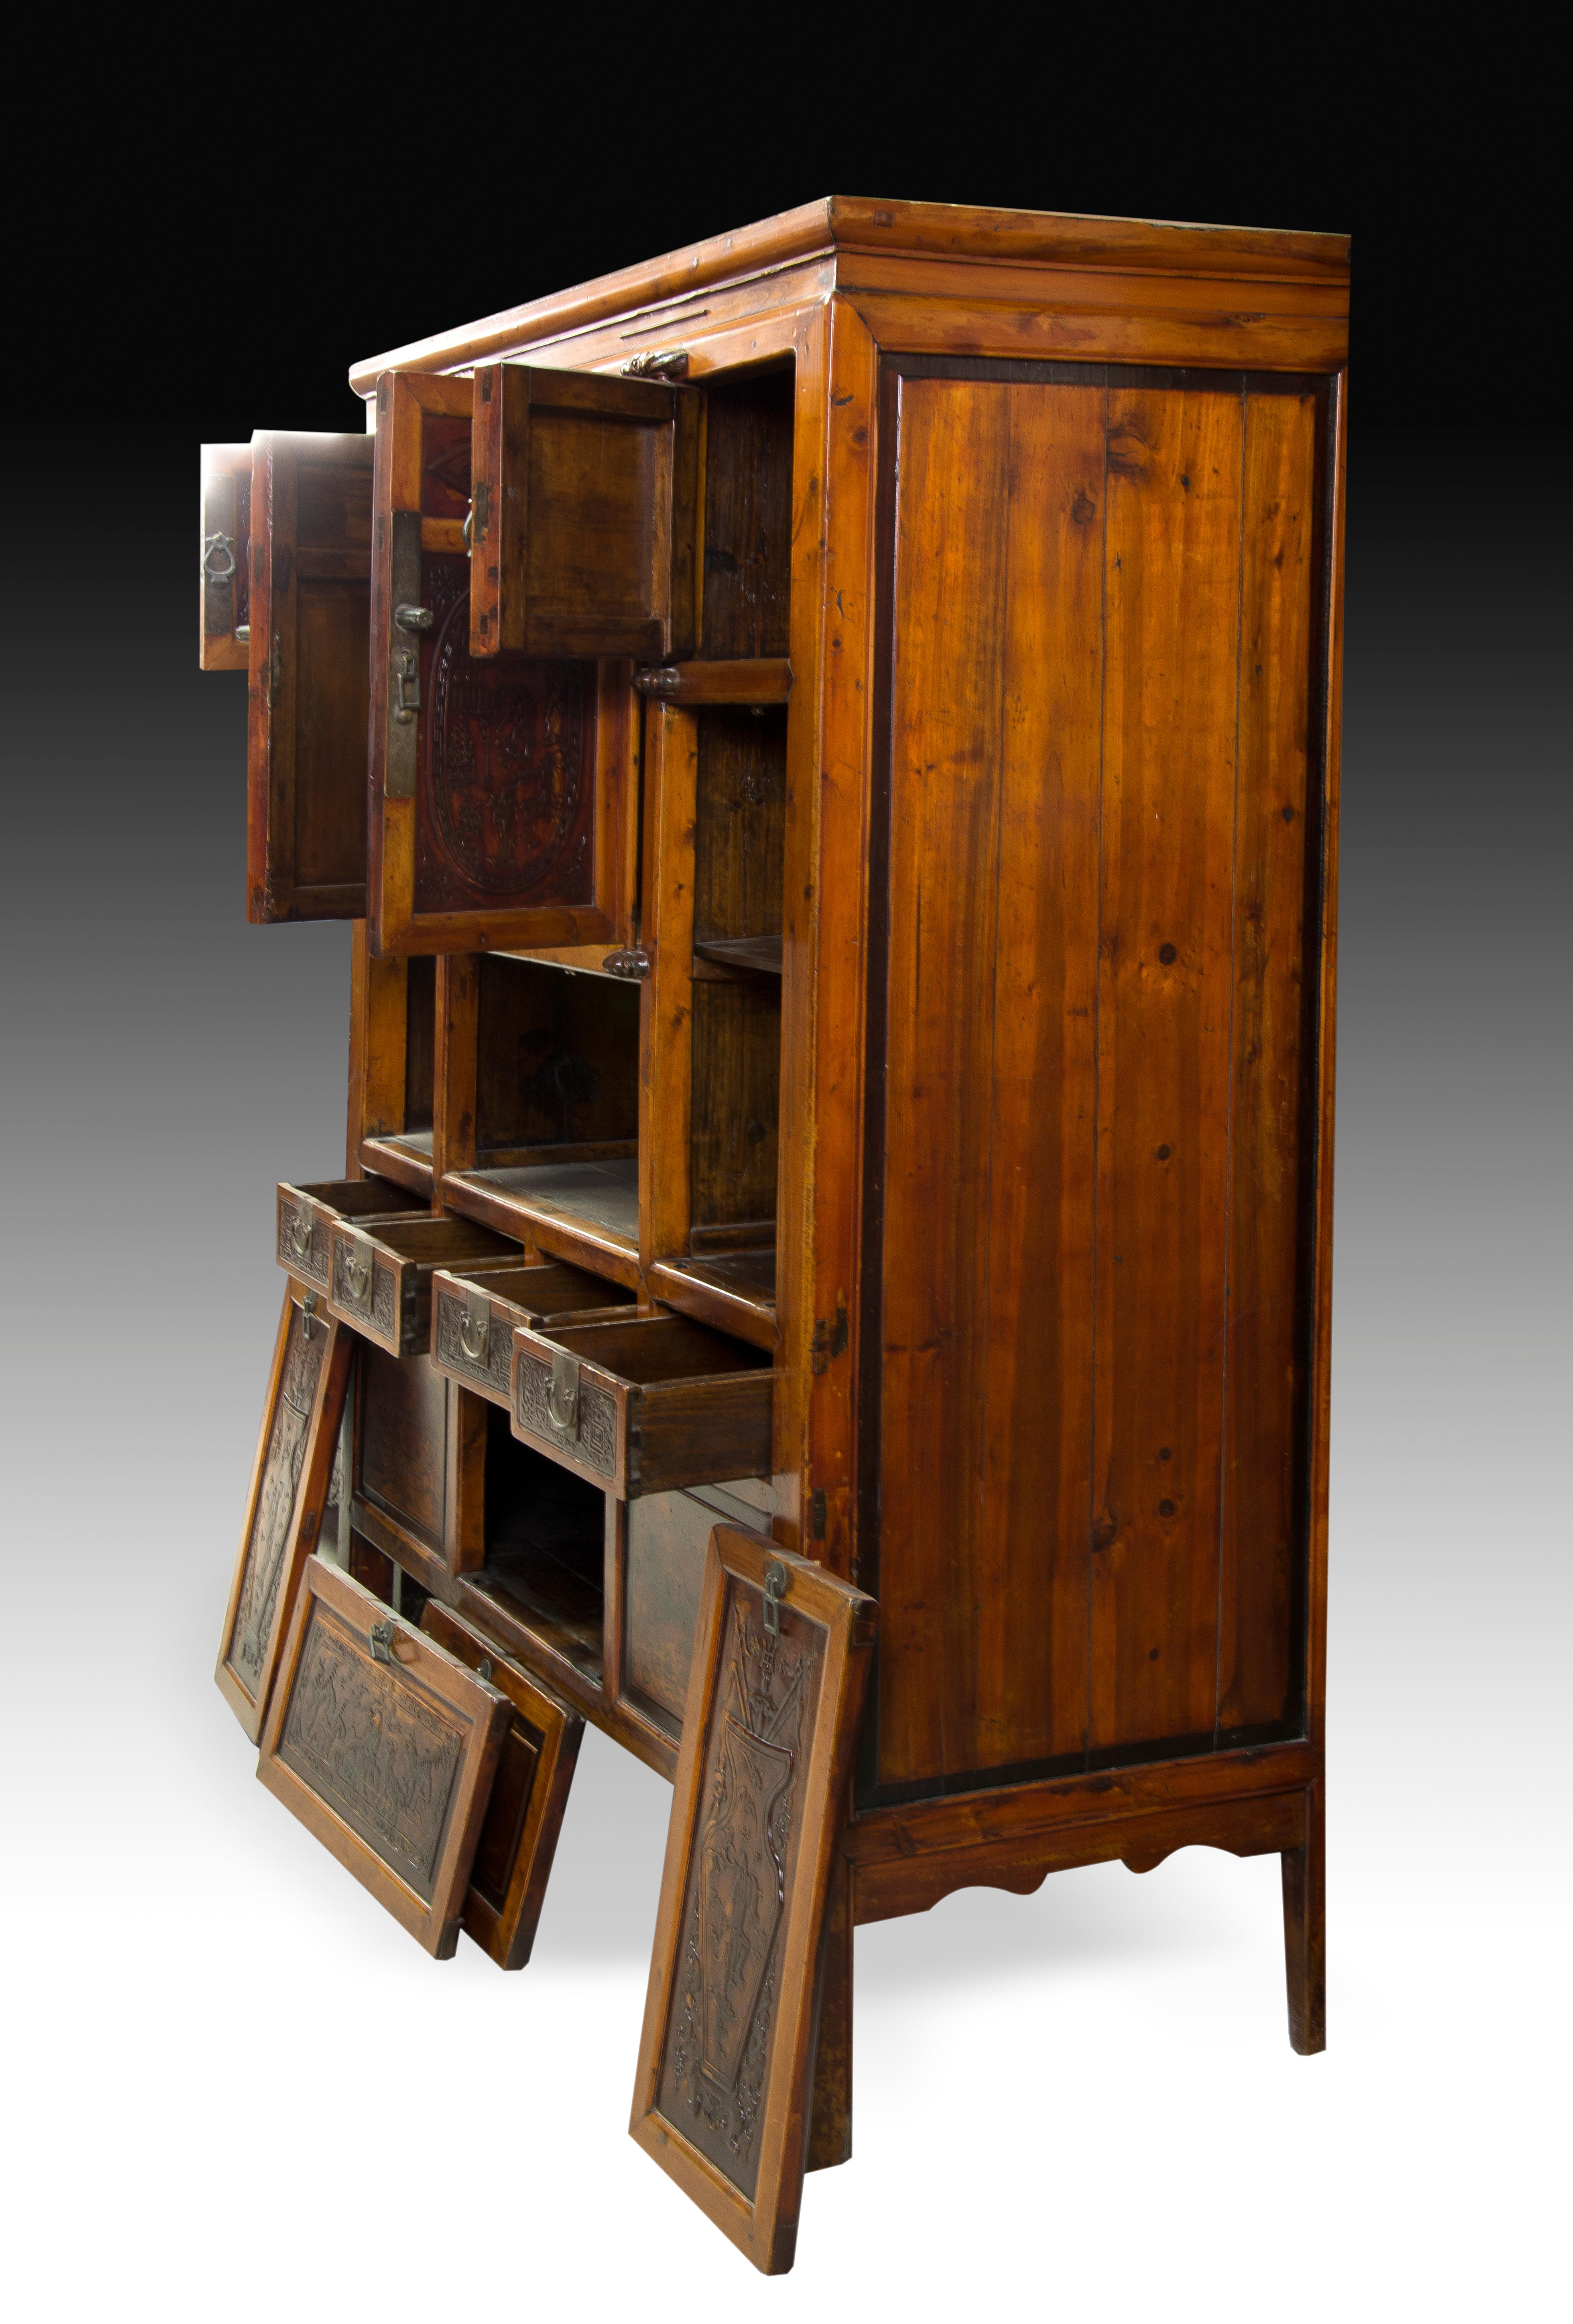 High cabinet made of carved wood, with metal fittings, which has a decoration with a certain oriental influence. In the upper part it has two doors in the center and two smaller ones on the sides, these located on two covered spaces that give access